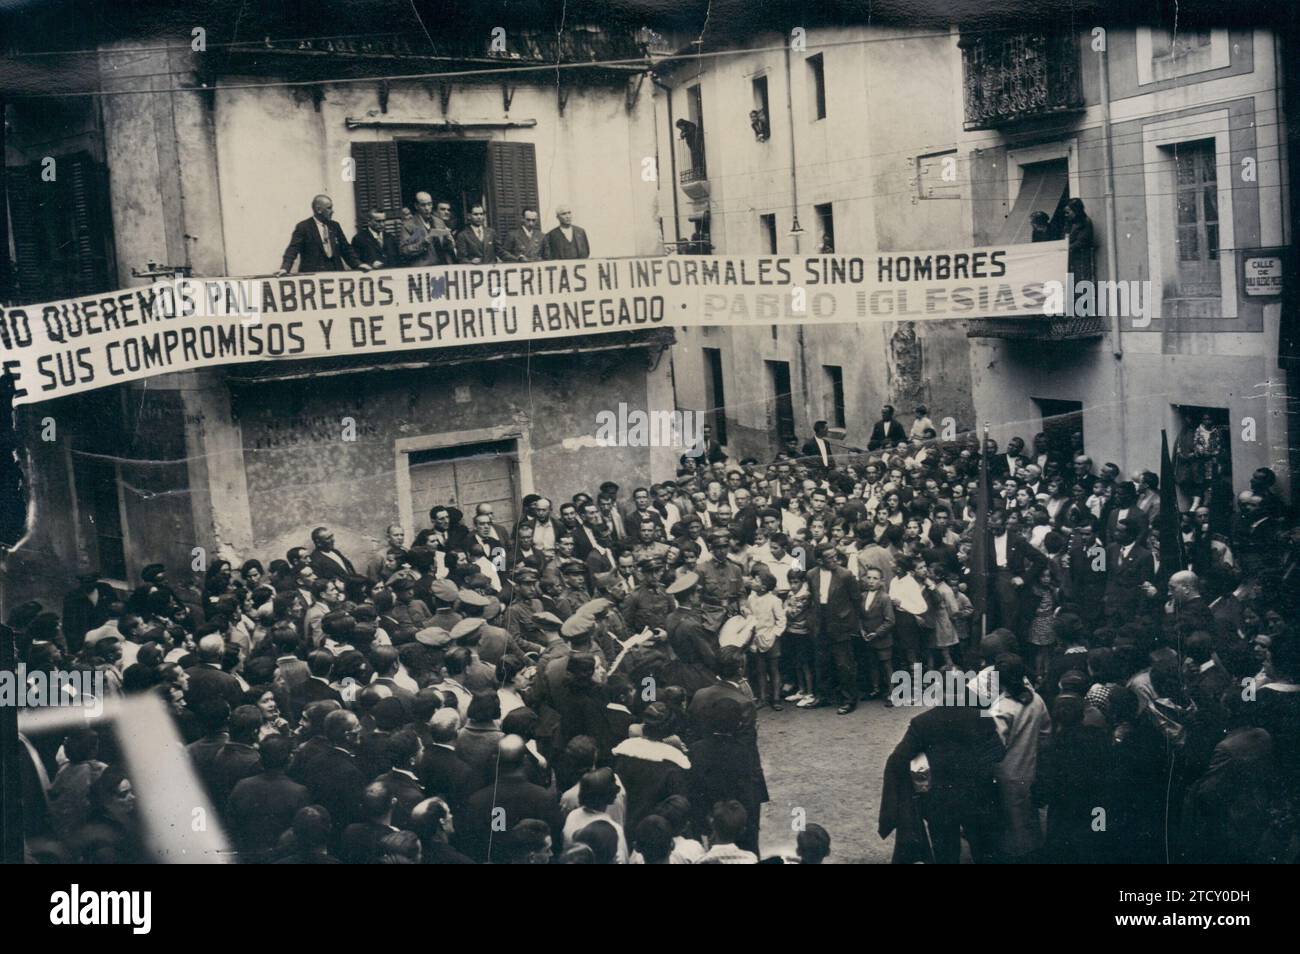 08/01/1931. Julio Turrau, mayor of Jaca, greets the Socialists of Eibar after discovering L Aplaca, which gives the name of Pablo Iglesias to a street and praises the figuera of the founder of the Spanish socialist workers' party. Credit: Album / Archivo ABC / Francisco de las Heras Calvo Stock Photo